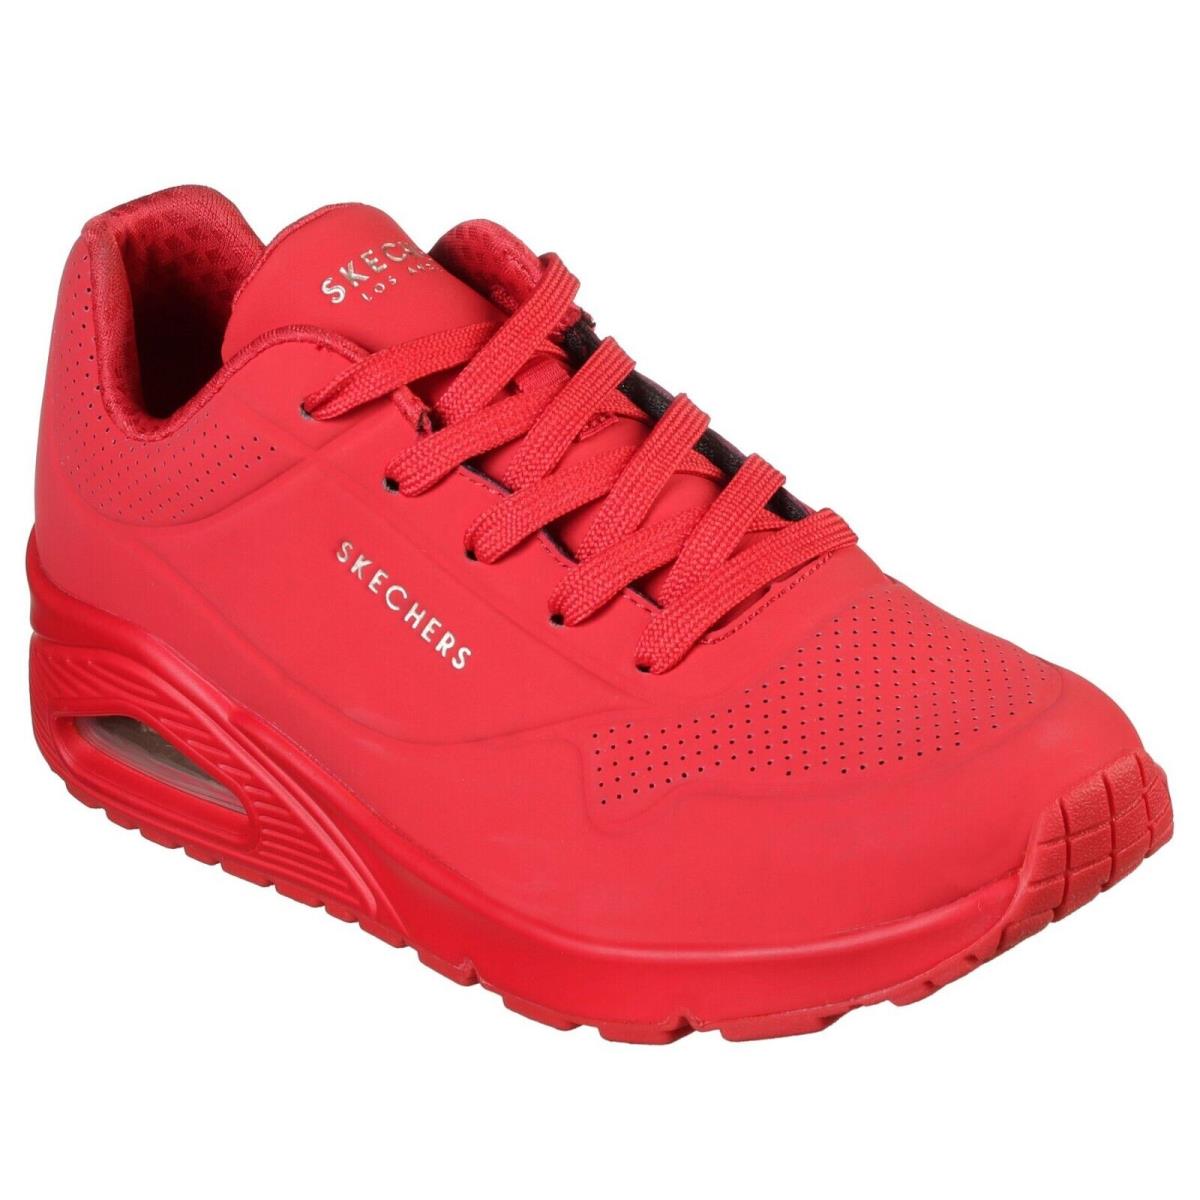 Skechers shoes  - Red 11